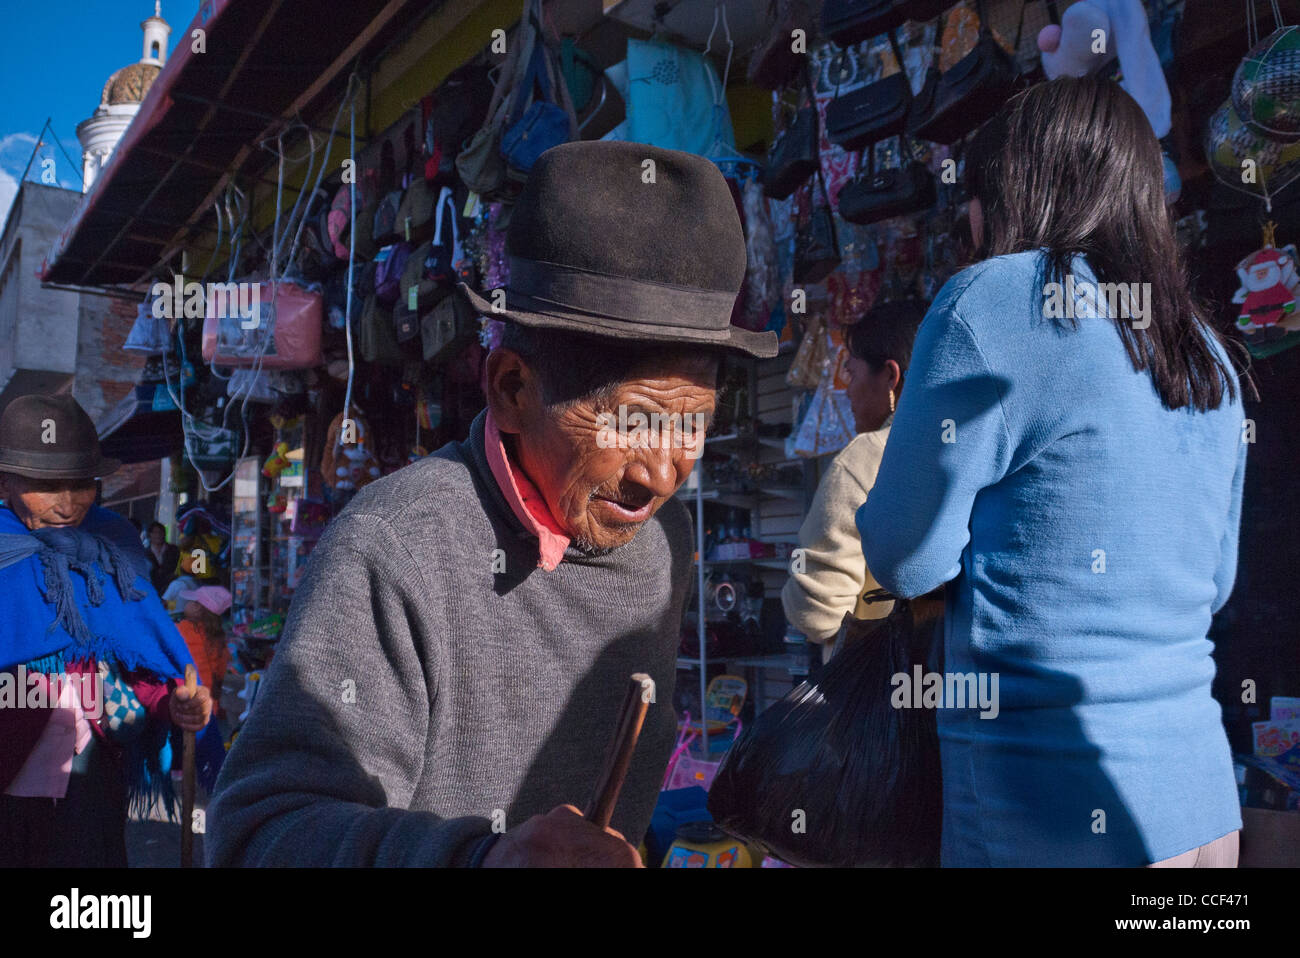 An elderly Ecuadorian man with a very wrinkled face wearing a fedora hat and holding a walking stick in marketplace. Stock Photo